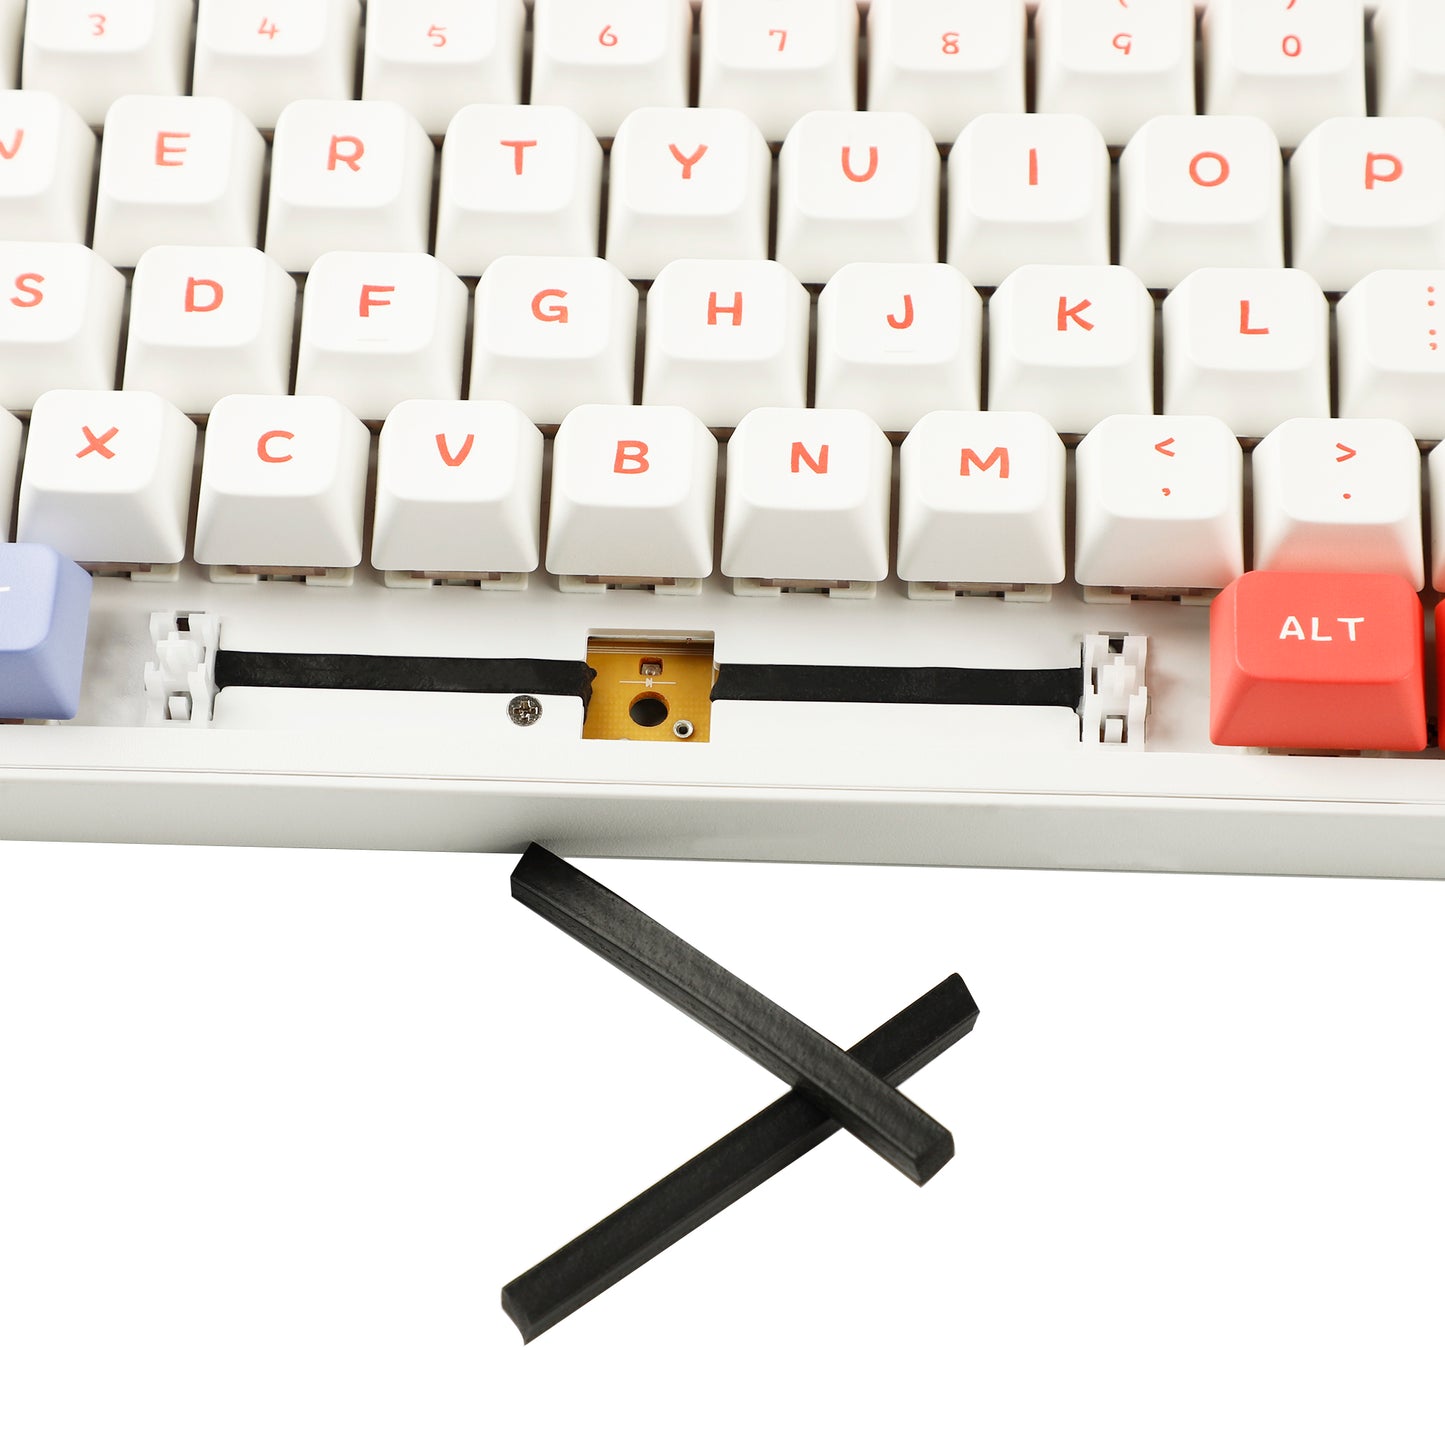 YMDK Plate Mounted Stabilizers Rubber Strip to Reduce Noise Dust Proof For Spacebar